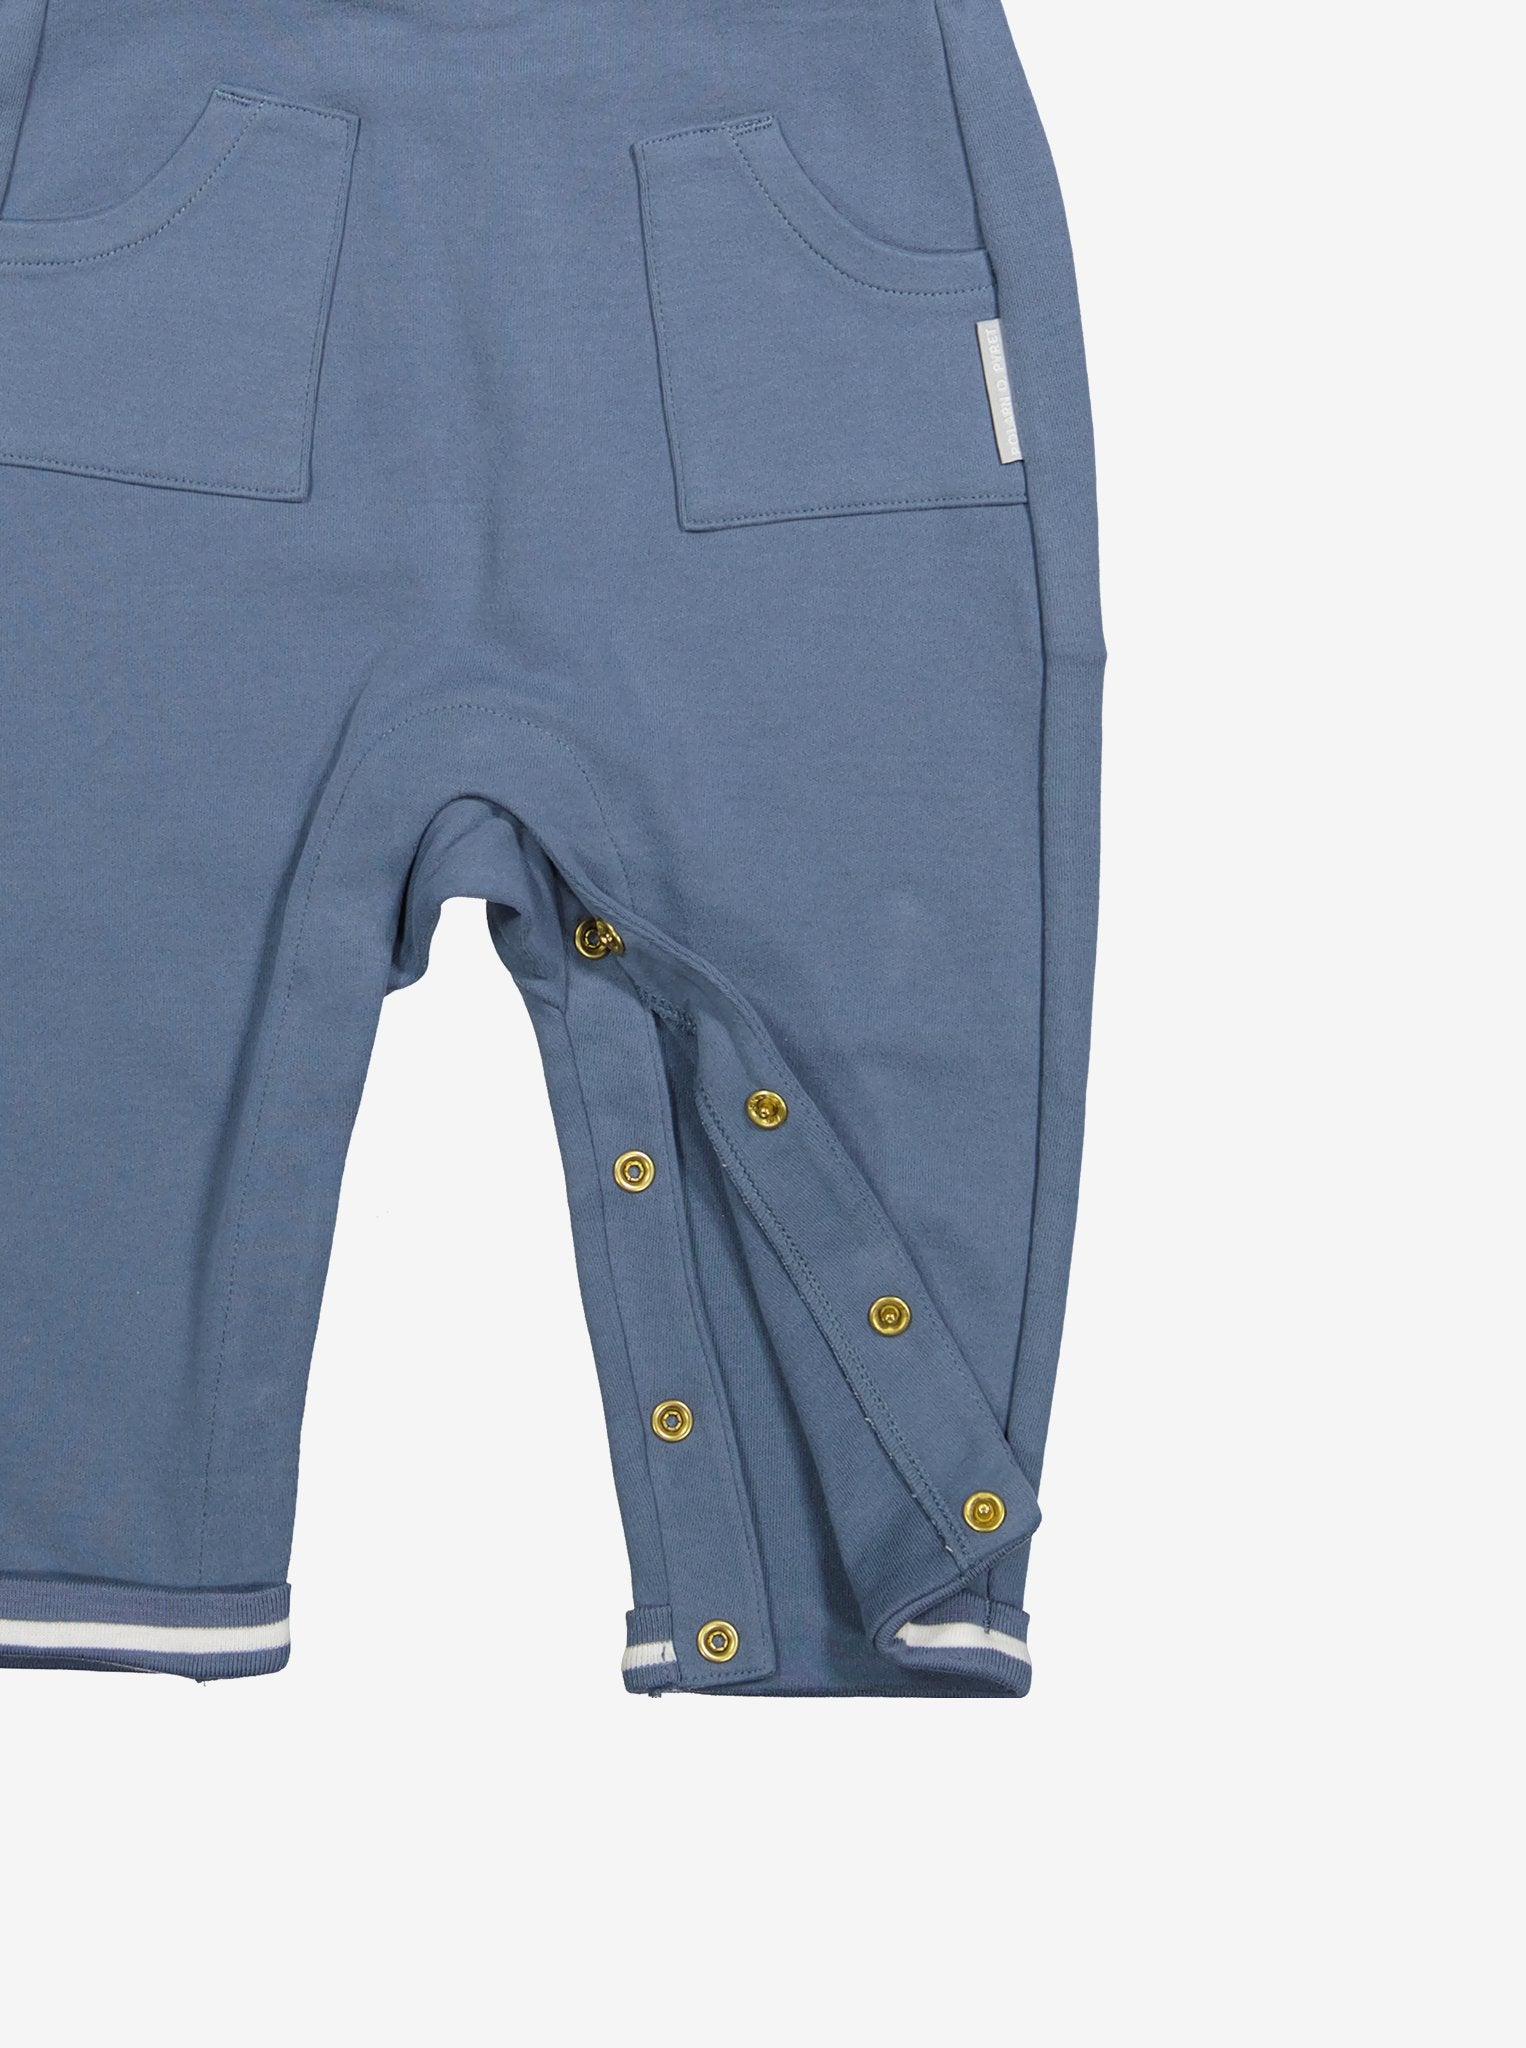  Organic Blue Baby Dungarees from Polarn O. Pyret Kidswear. Made with 100% organic cotton.